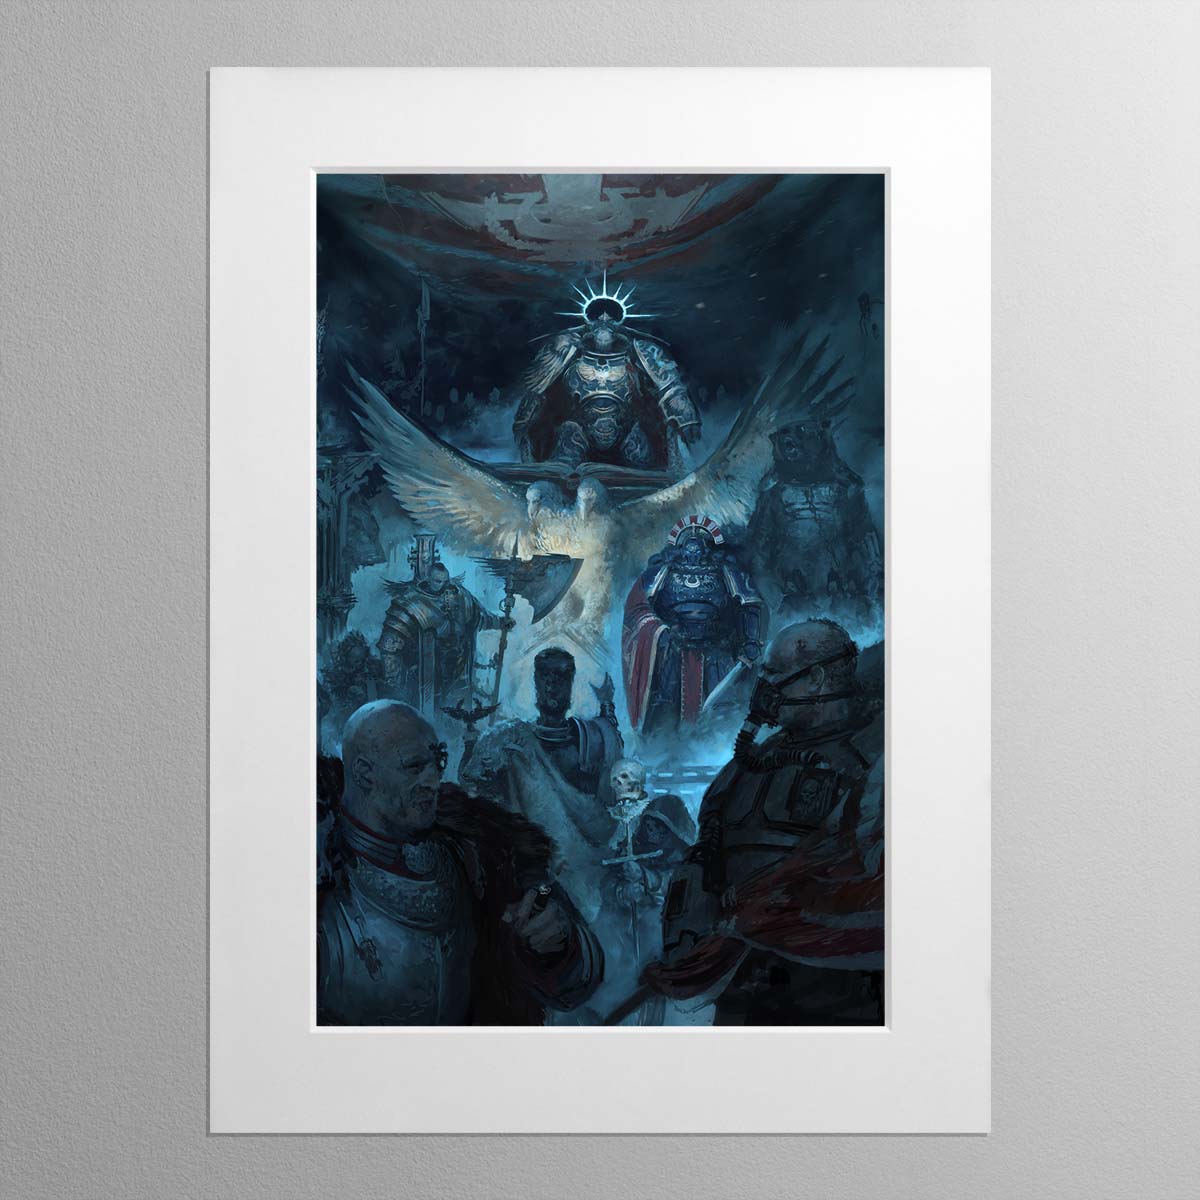 Guilliman’s Council – Mounted Print